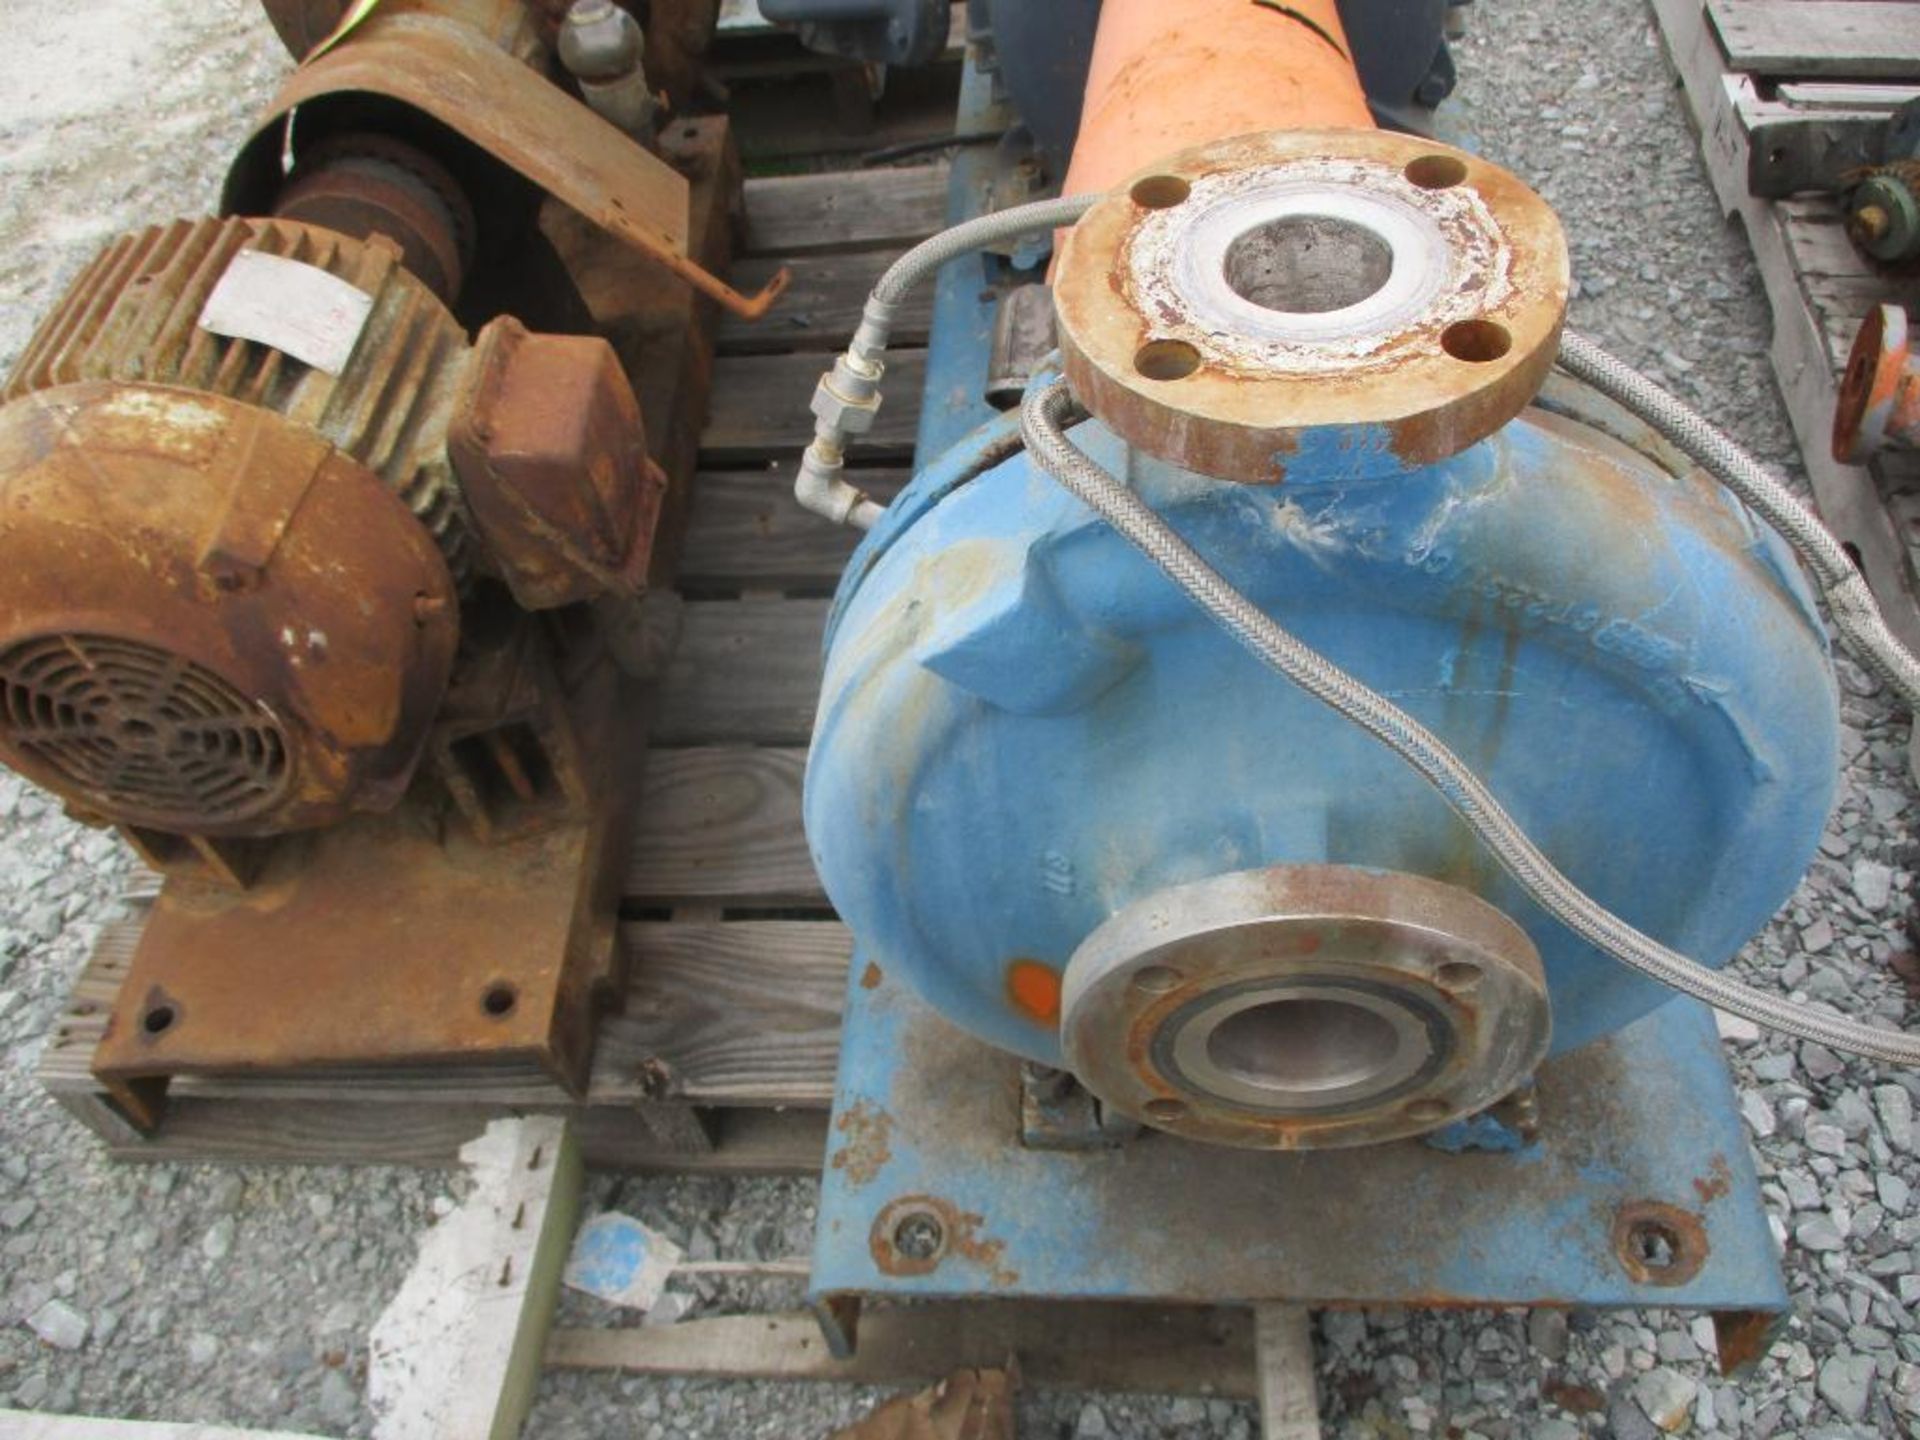 (1) Durco 2x3x13 316 Pump w/ 50HP Motor & (1) Durco 1-1/2x13x13 Pump w/ 7.5HP Motor - Image 2 of 4